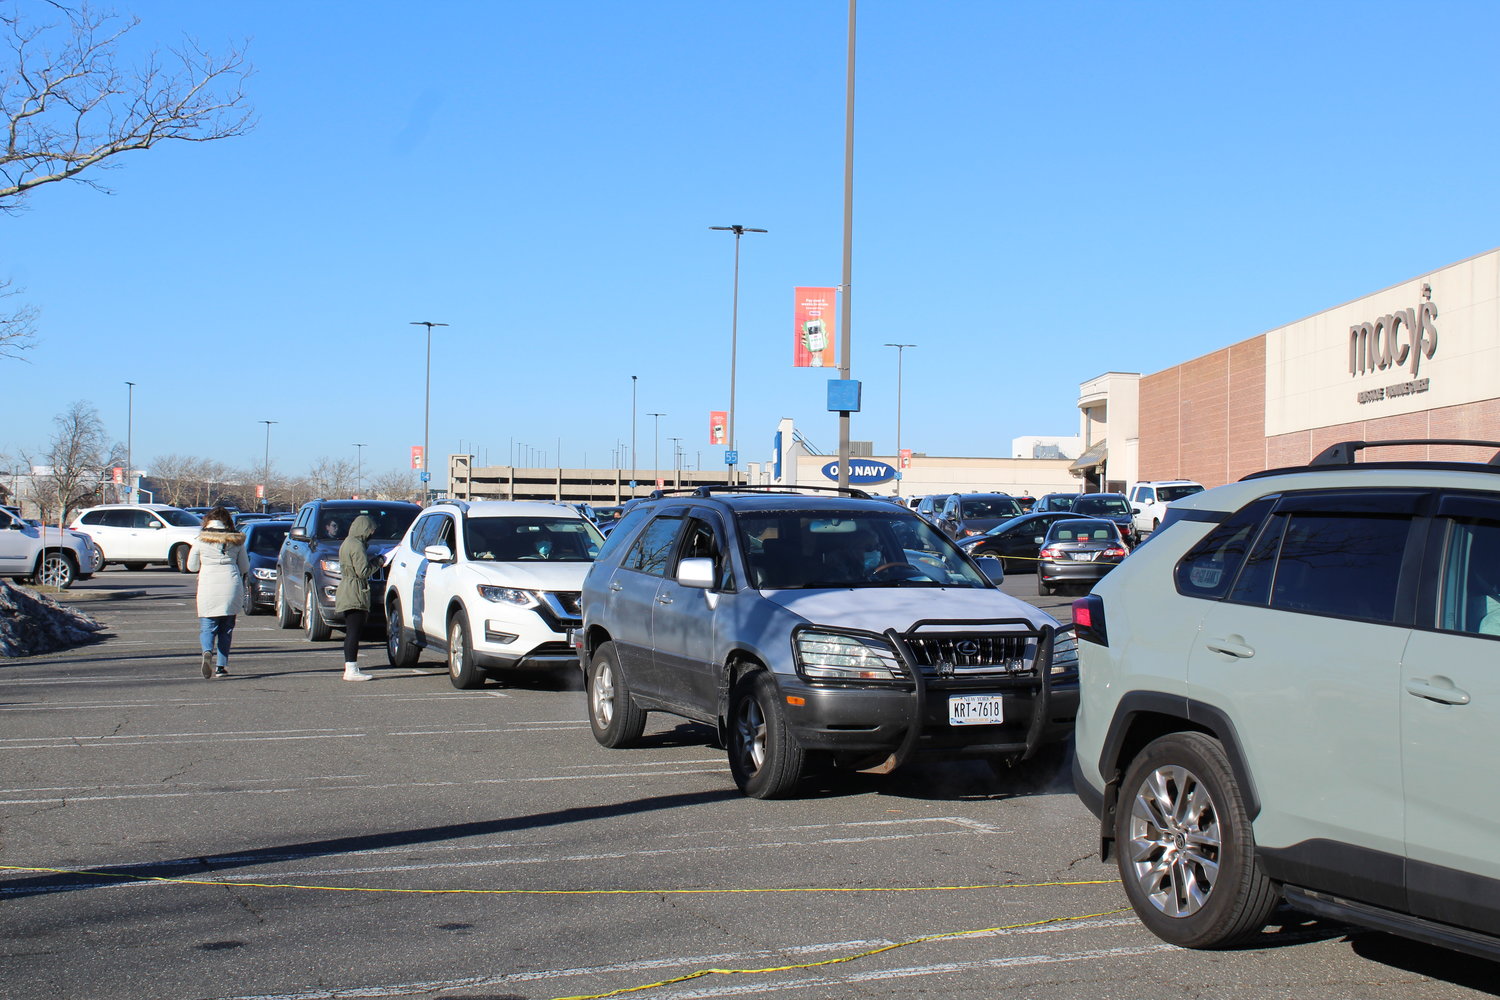 Lines of cars waited outside the Macy’s Men’s Store parking lot for their kits.